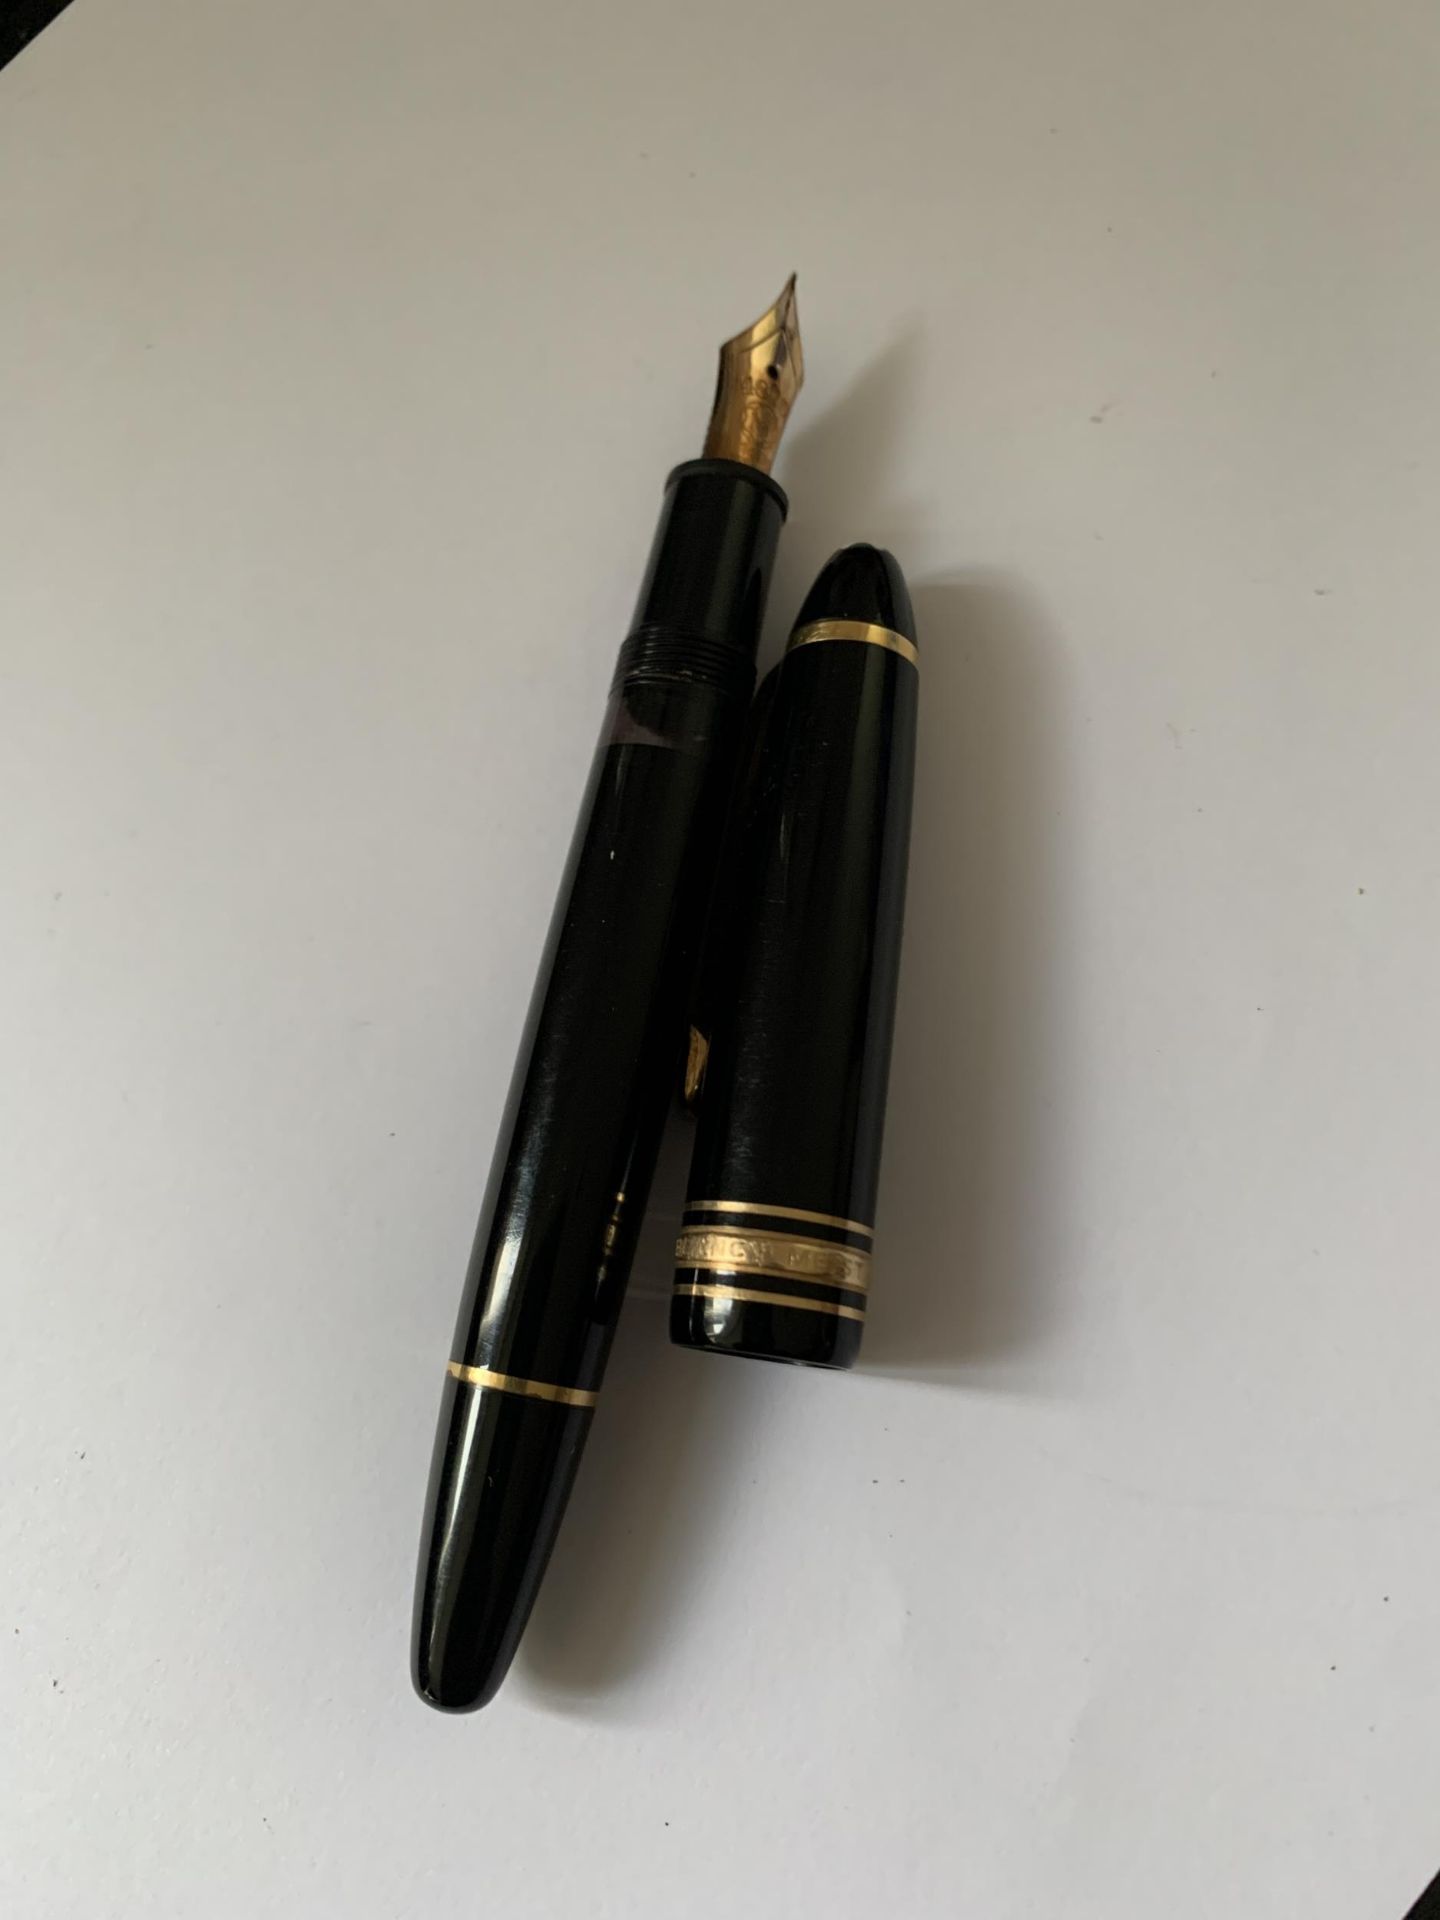 A MONT BLANC MEISTERSTUCK GOLD COATED LE GRAND FOUNTAIN PEN WITH 18 CARAT GOLD MEDIUM NIB - Image 4 of 8